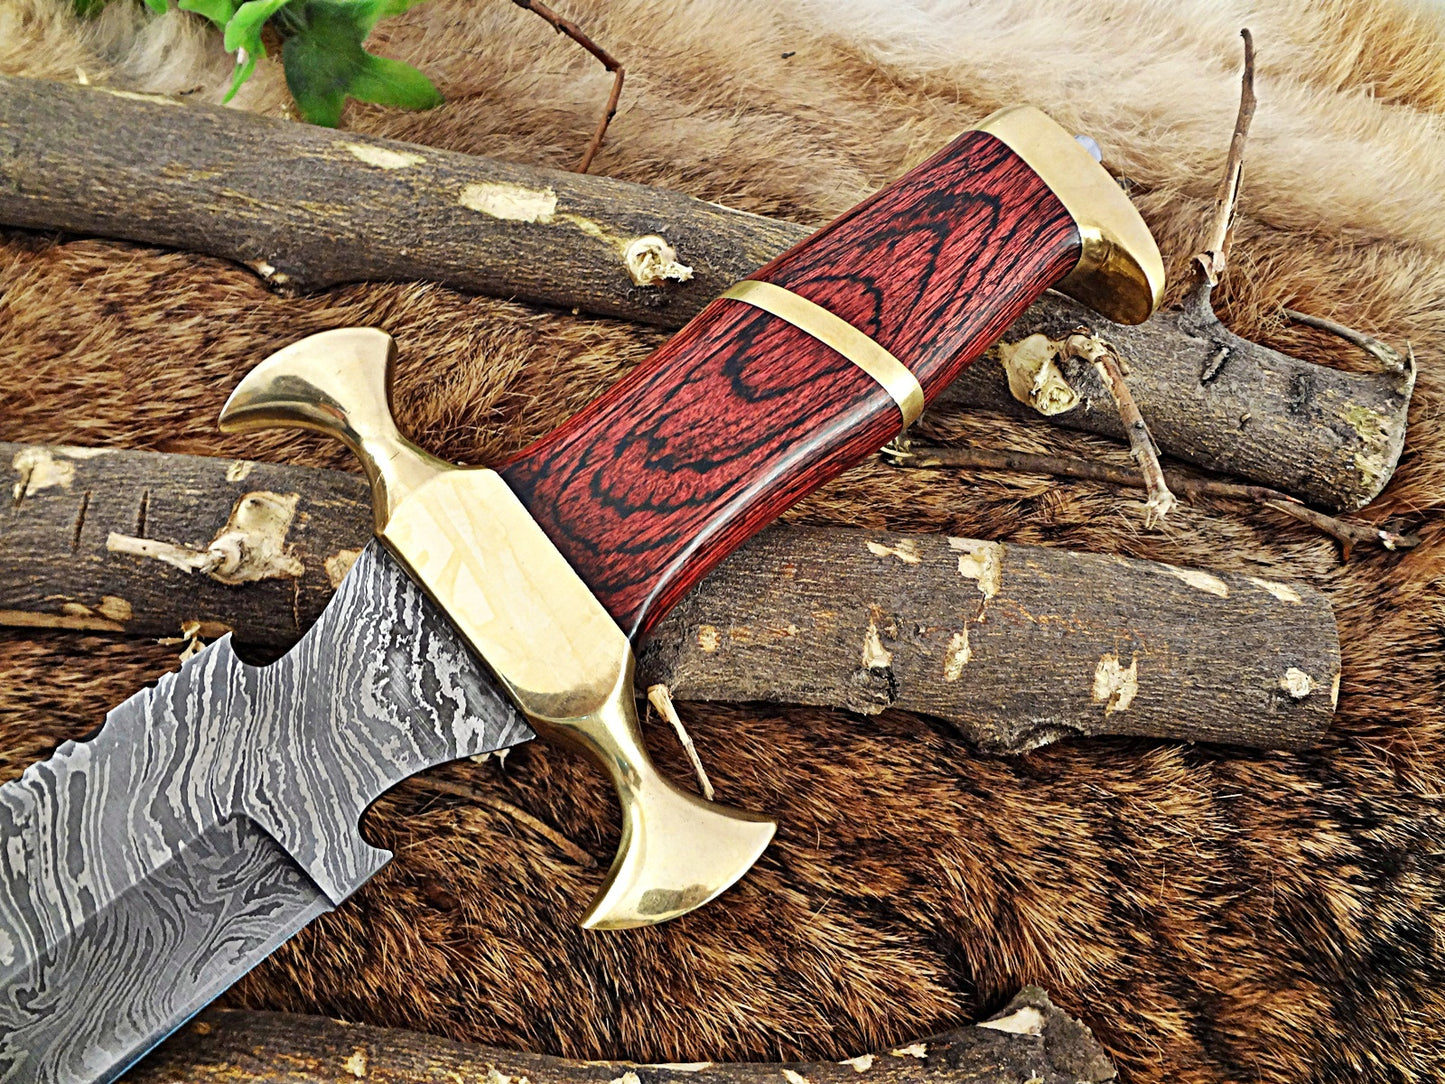 15" Long Hunting Bowie knife, hand forged Damascus steel, Red  Dollar wood with Brass Pommel & Finger guard, Cow Leather sheath